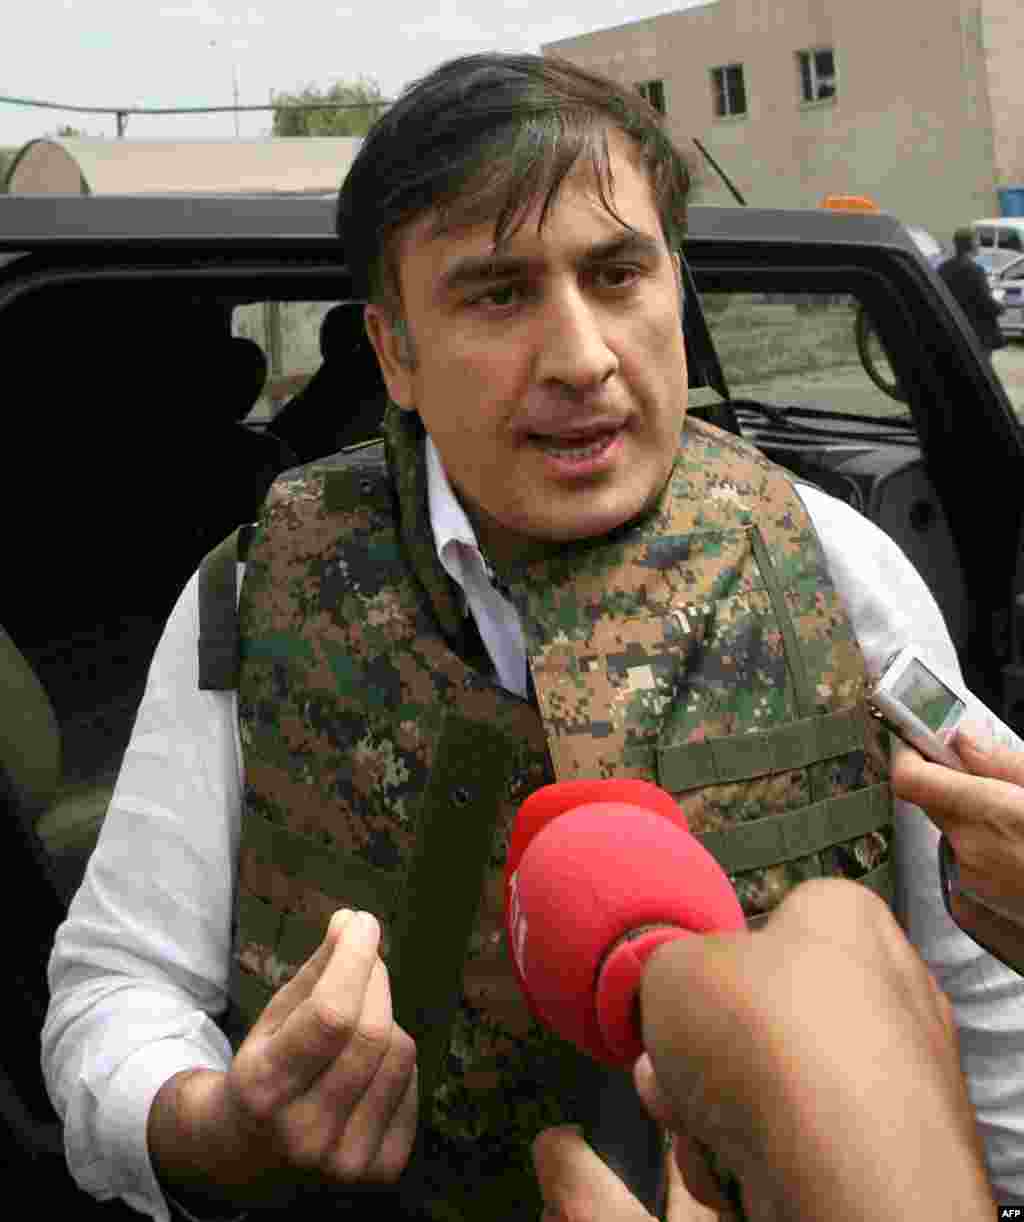 President Mikheil Saakashvili, in a camouflage bulletproof vest, visits the town of Gori on August 11, 2008, to examine damage resulting from the armed conflict between Russia and Georgia over the Georgian breakaway republics of Abkhazia and South Ossetia.